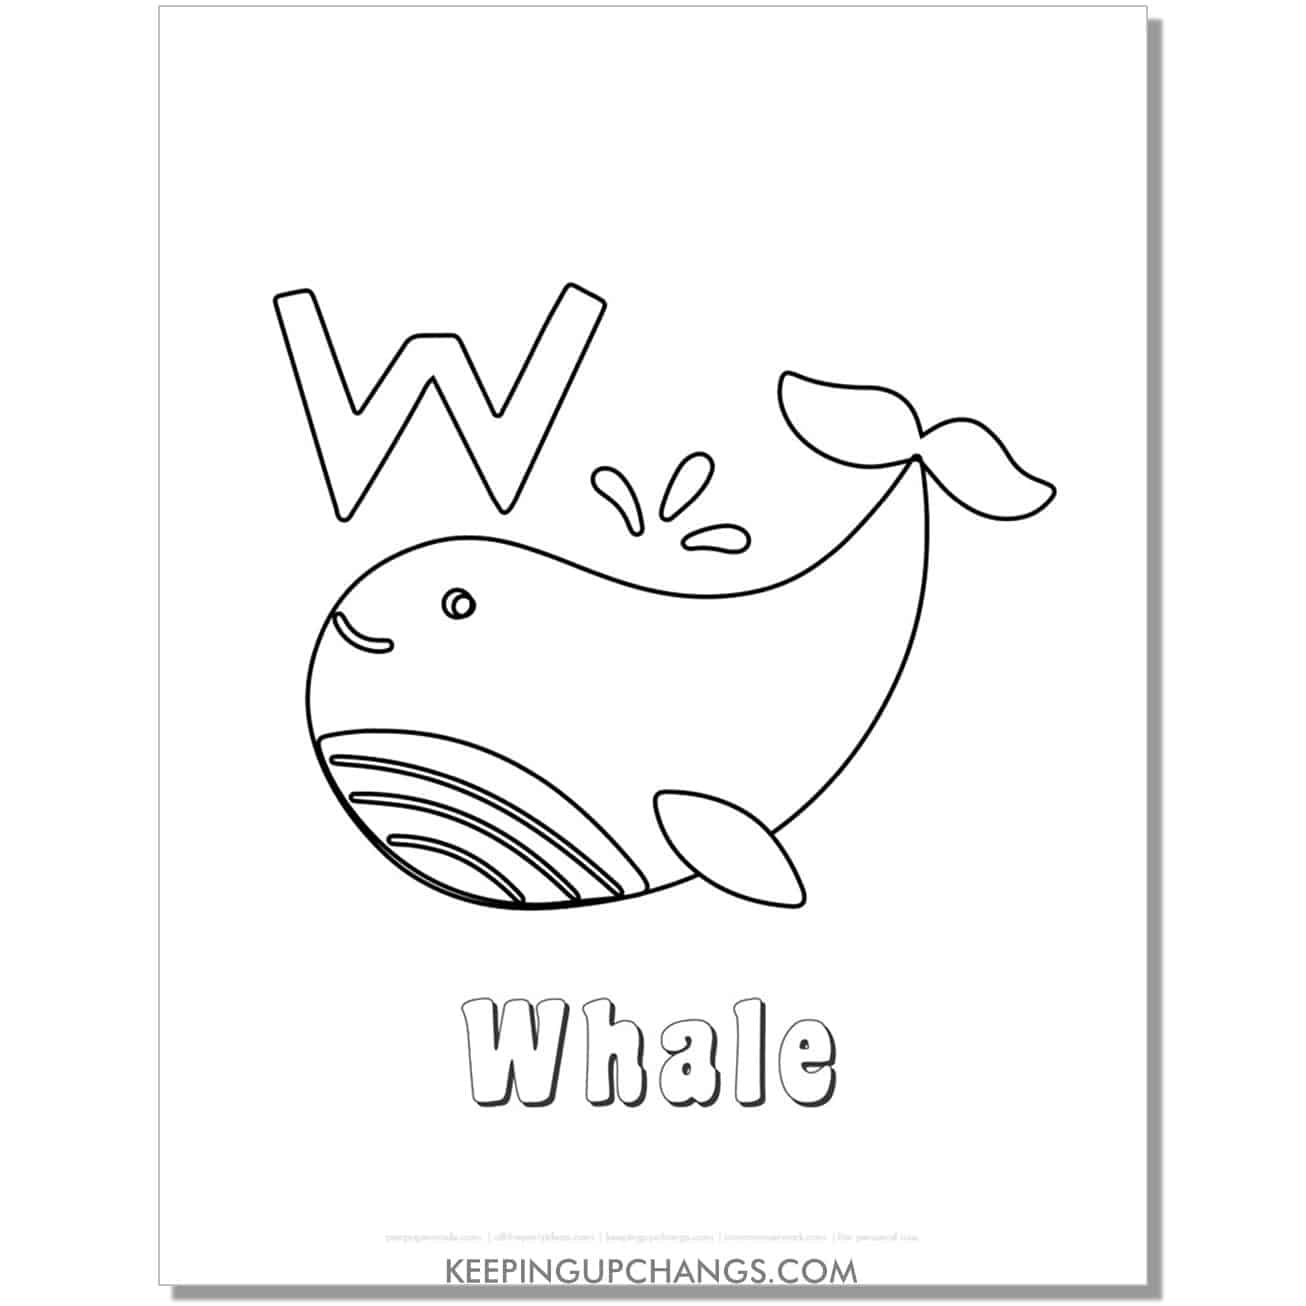 fun abc w coloring page with whale hand drawing.